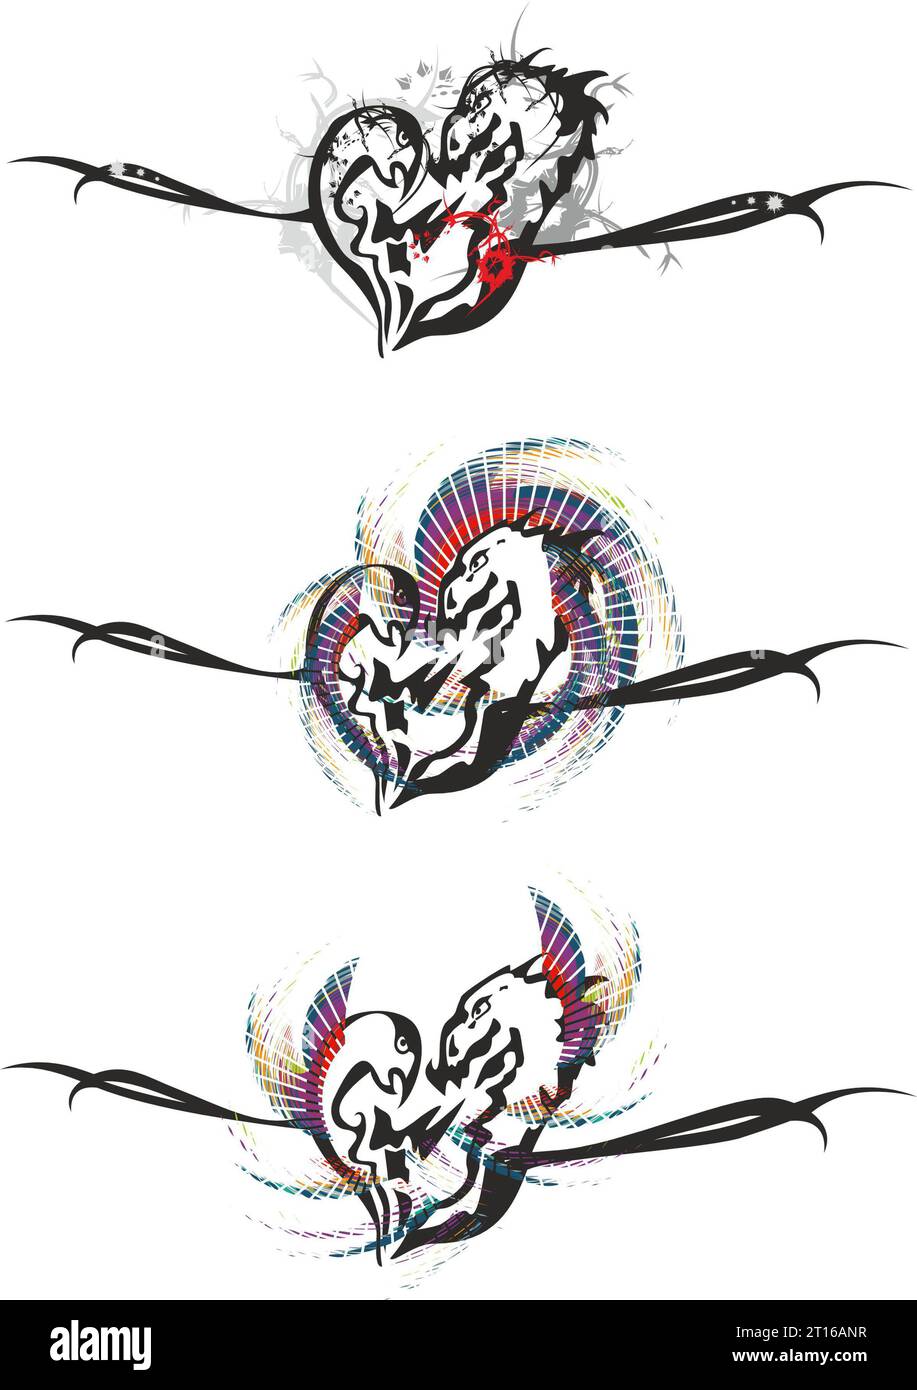 Ornate hearts created by dragon and eagle elements on white. Tribal symbols of love for emblems, embroidery, fabric, prints, fashion trends, stickers Stock Photo